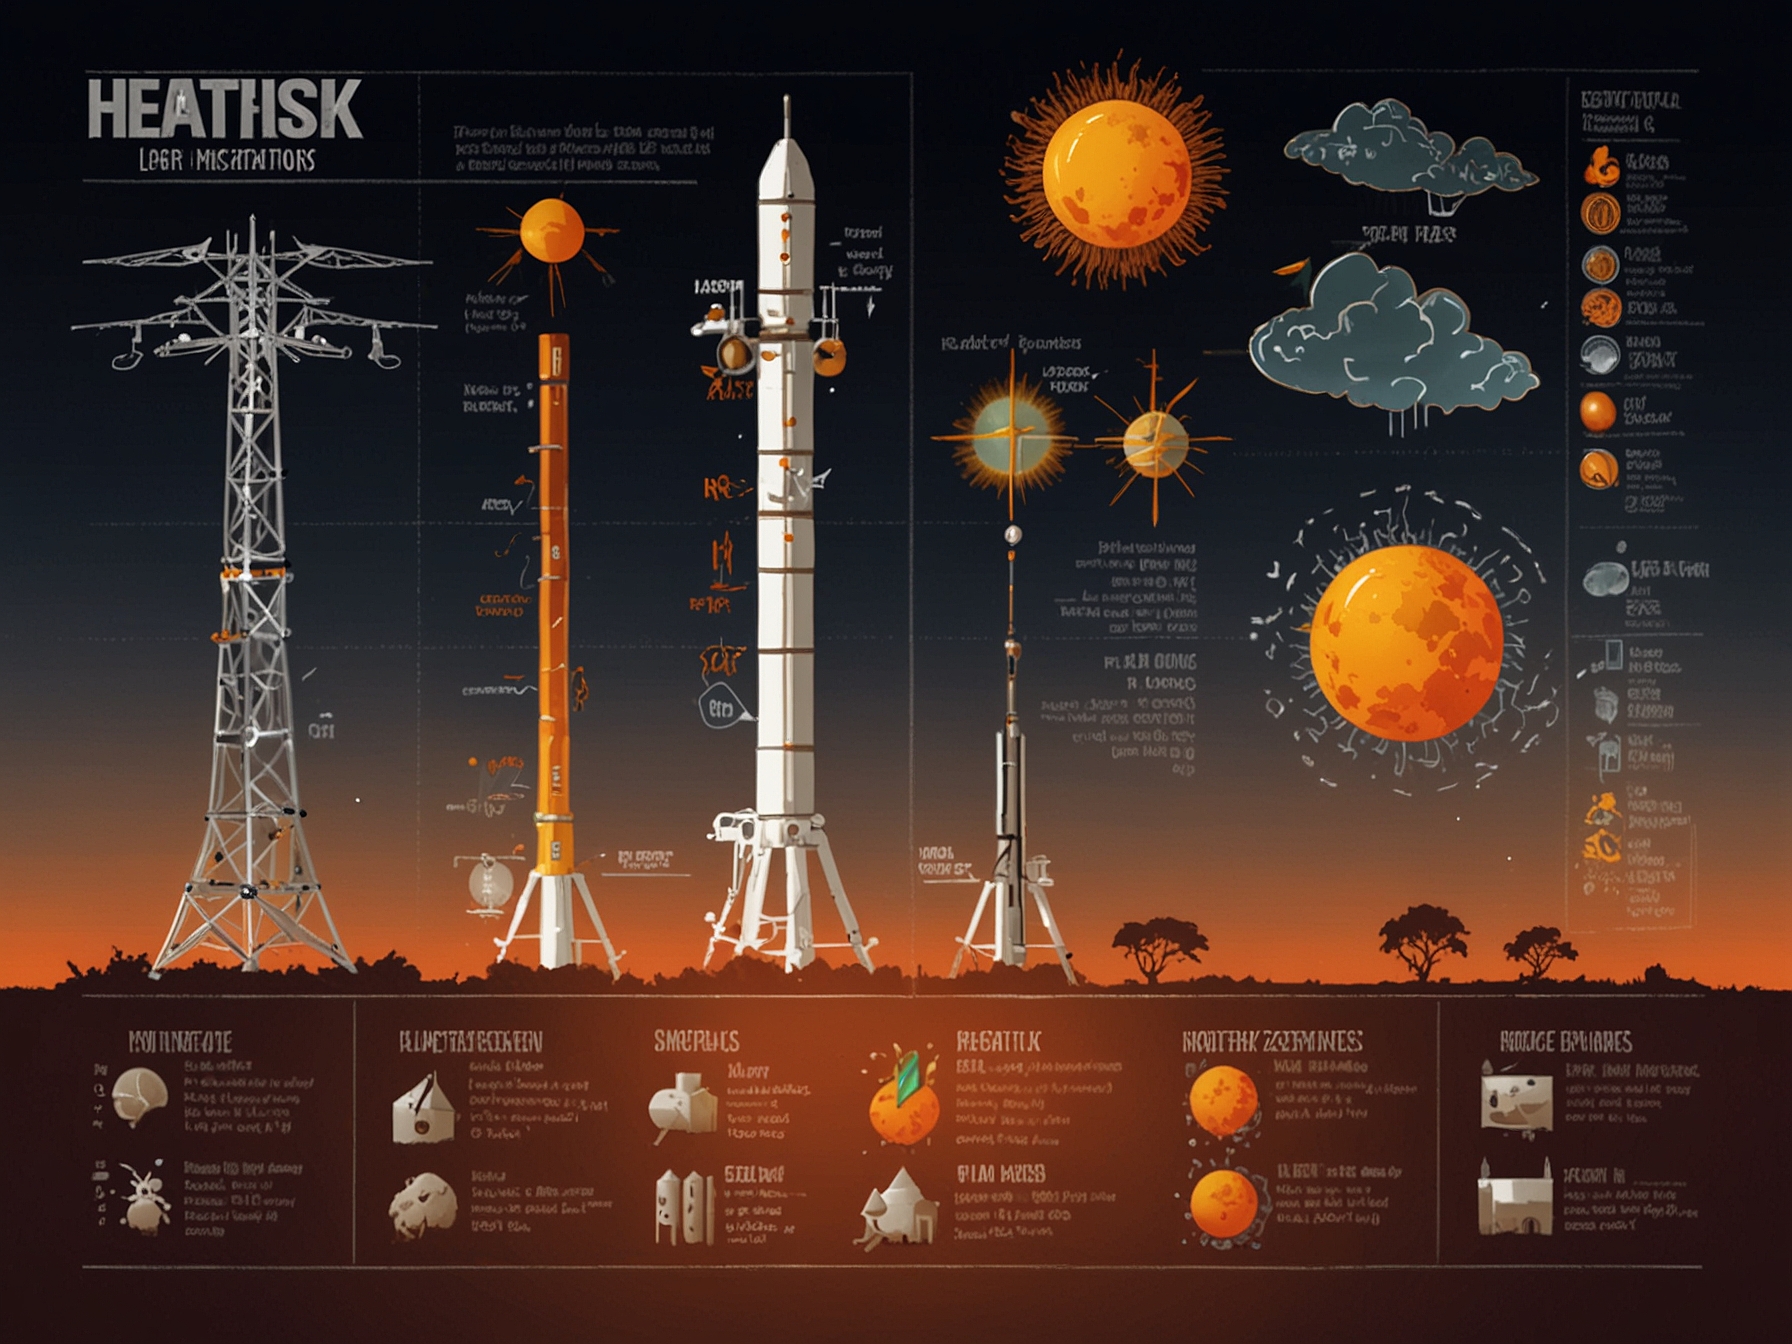 An infographic illustrating how the HeatRisk tools integrate data from satellites and weather stations to provide accurate, localized heatwave predictions and safety information.